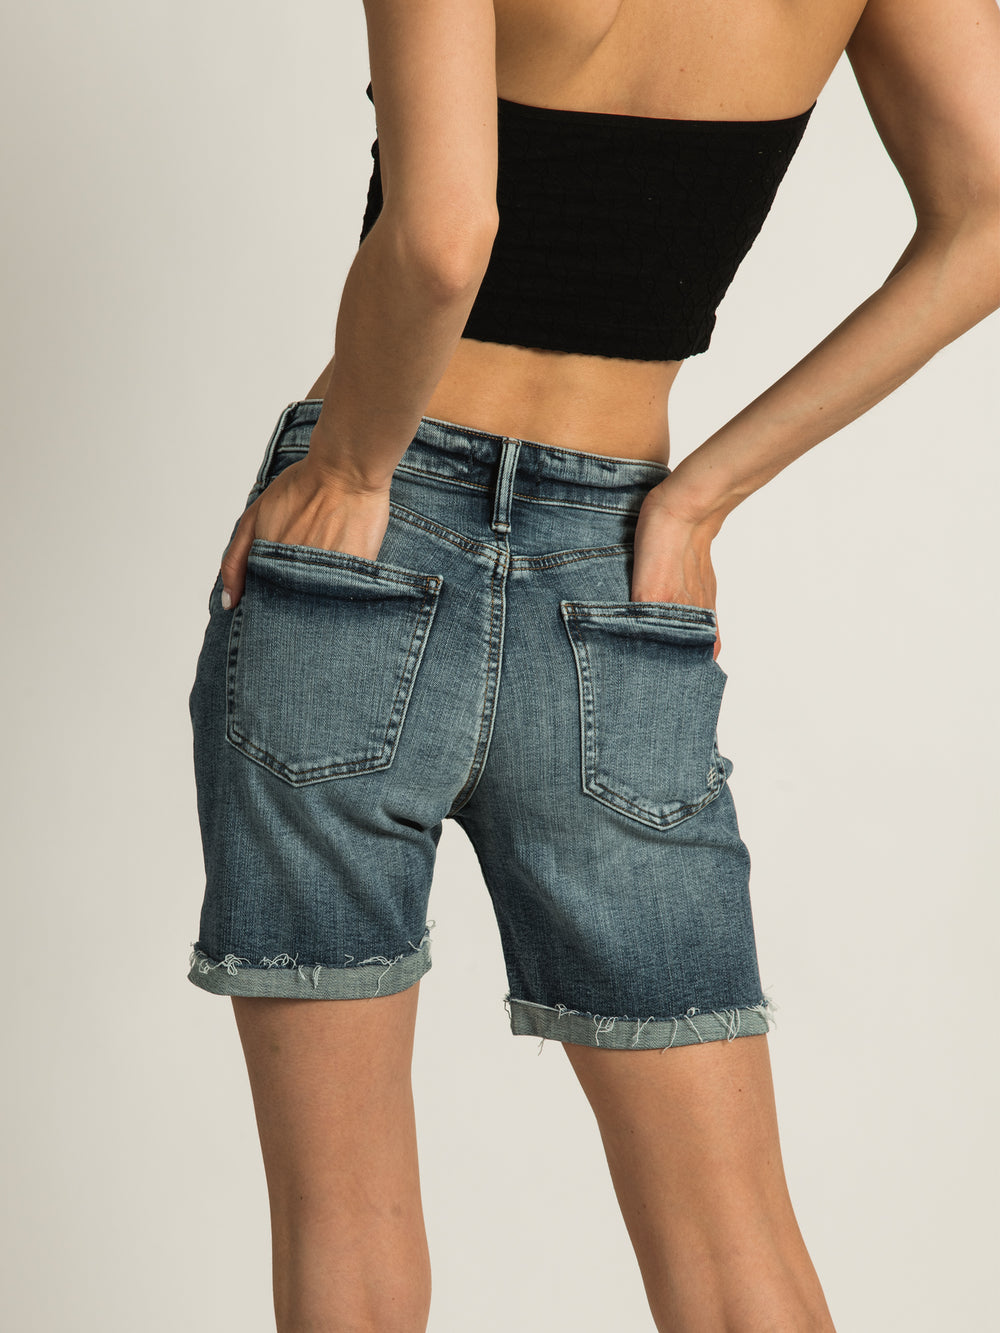 SILVER JEANS SURE THING LONG SHORT - DÉSTOCKAGE